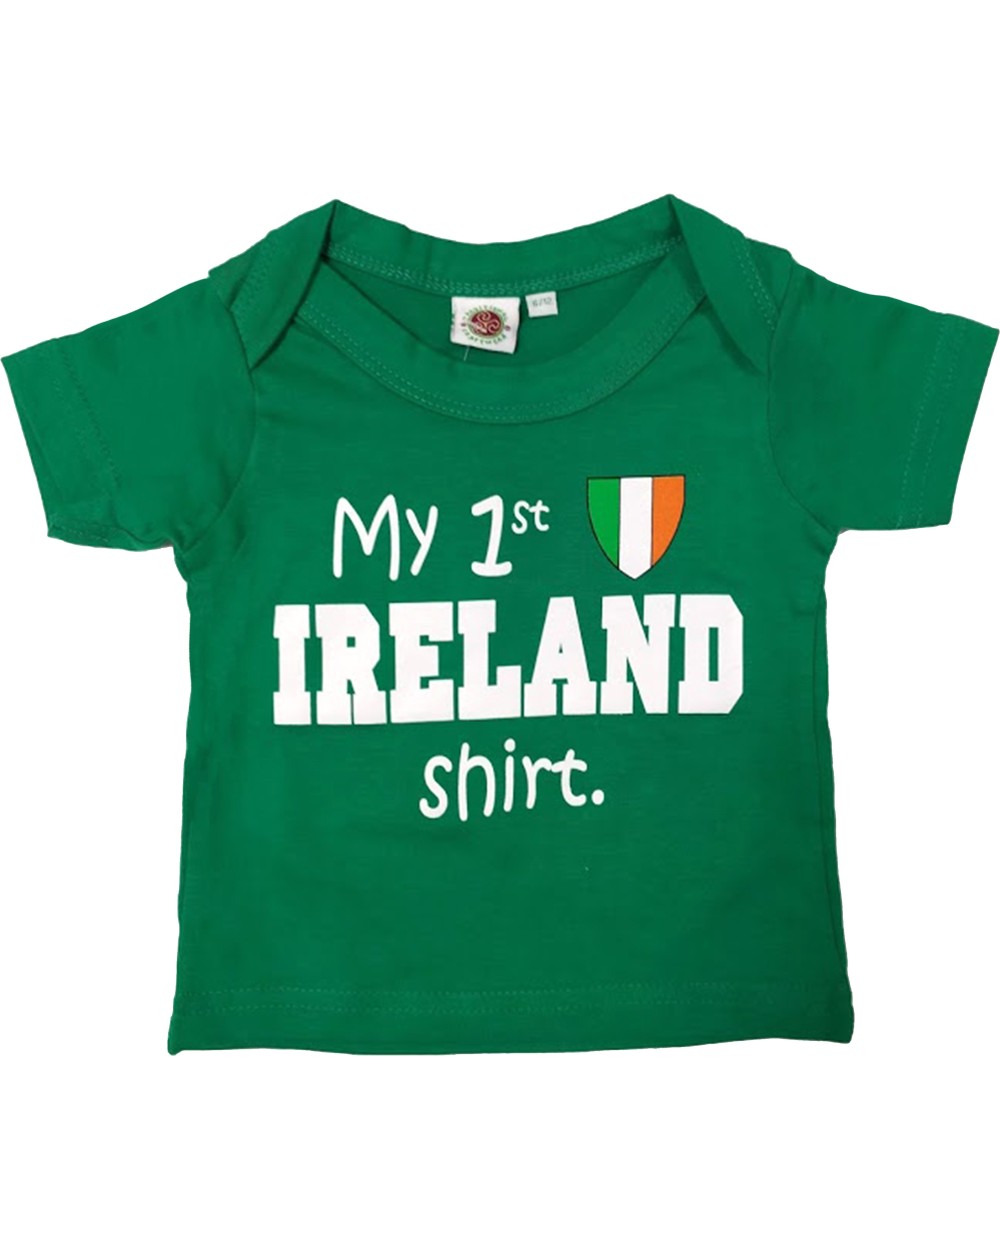 Lansdowne Sports Official Collection Emerald Green Ringer Kids T-Shirt